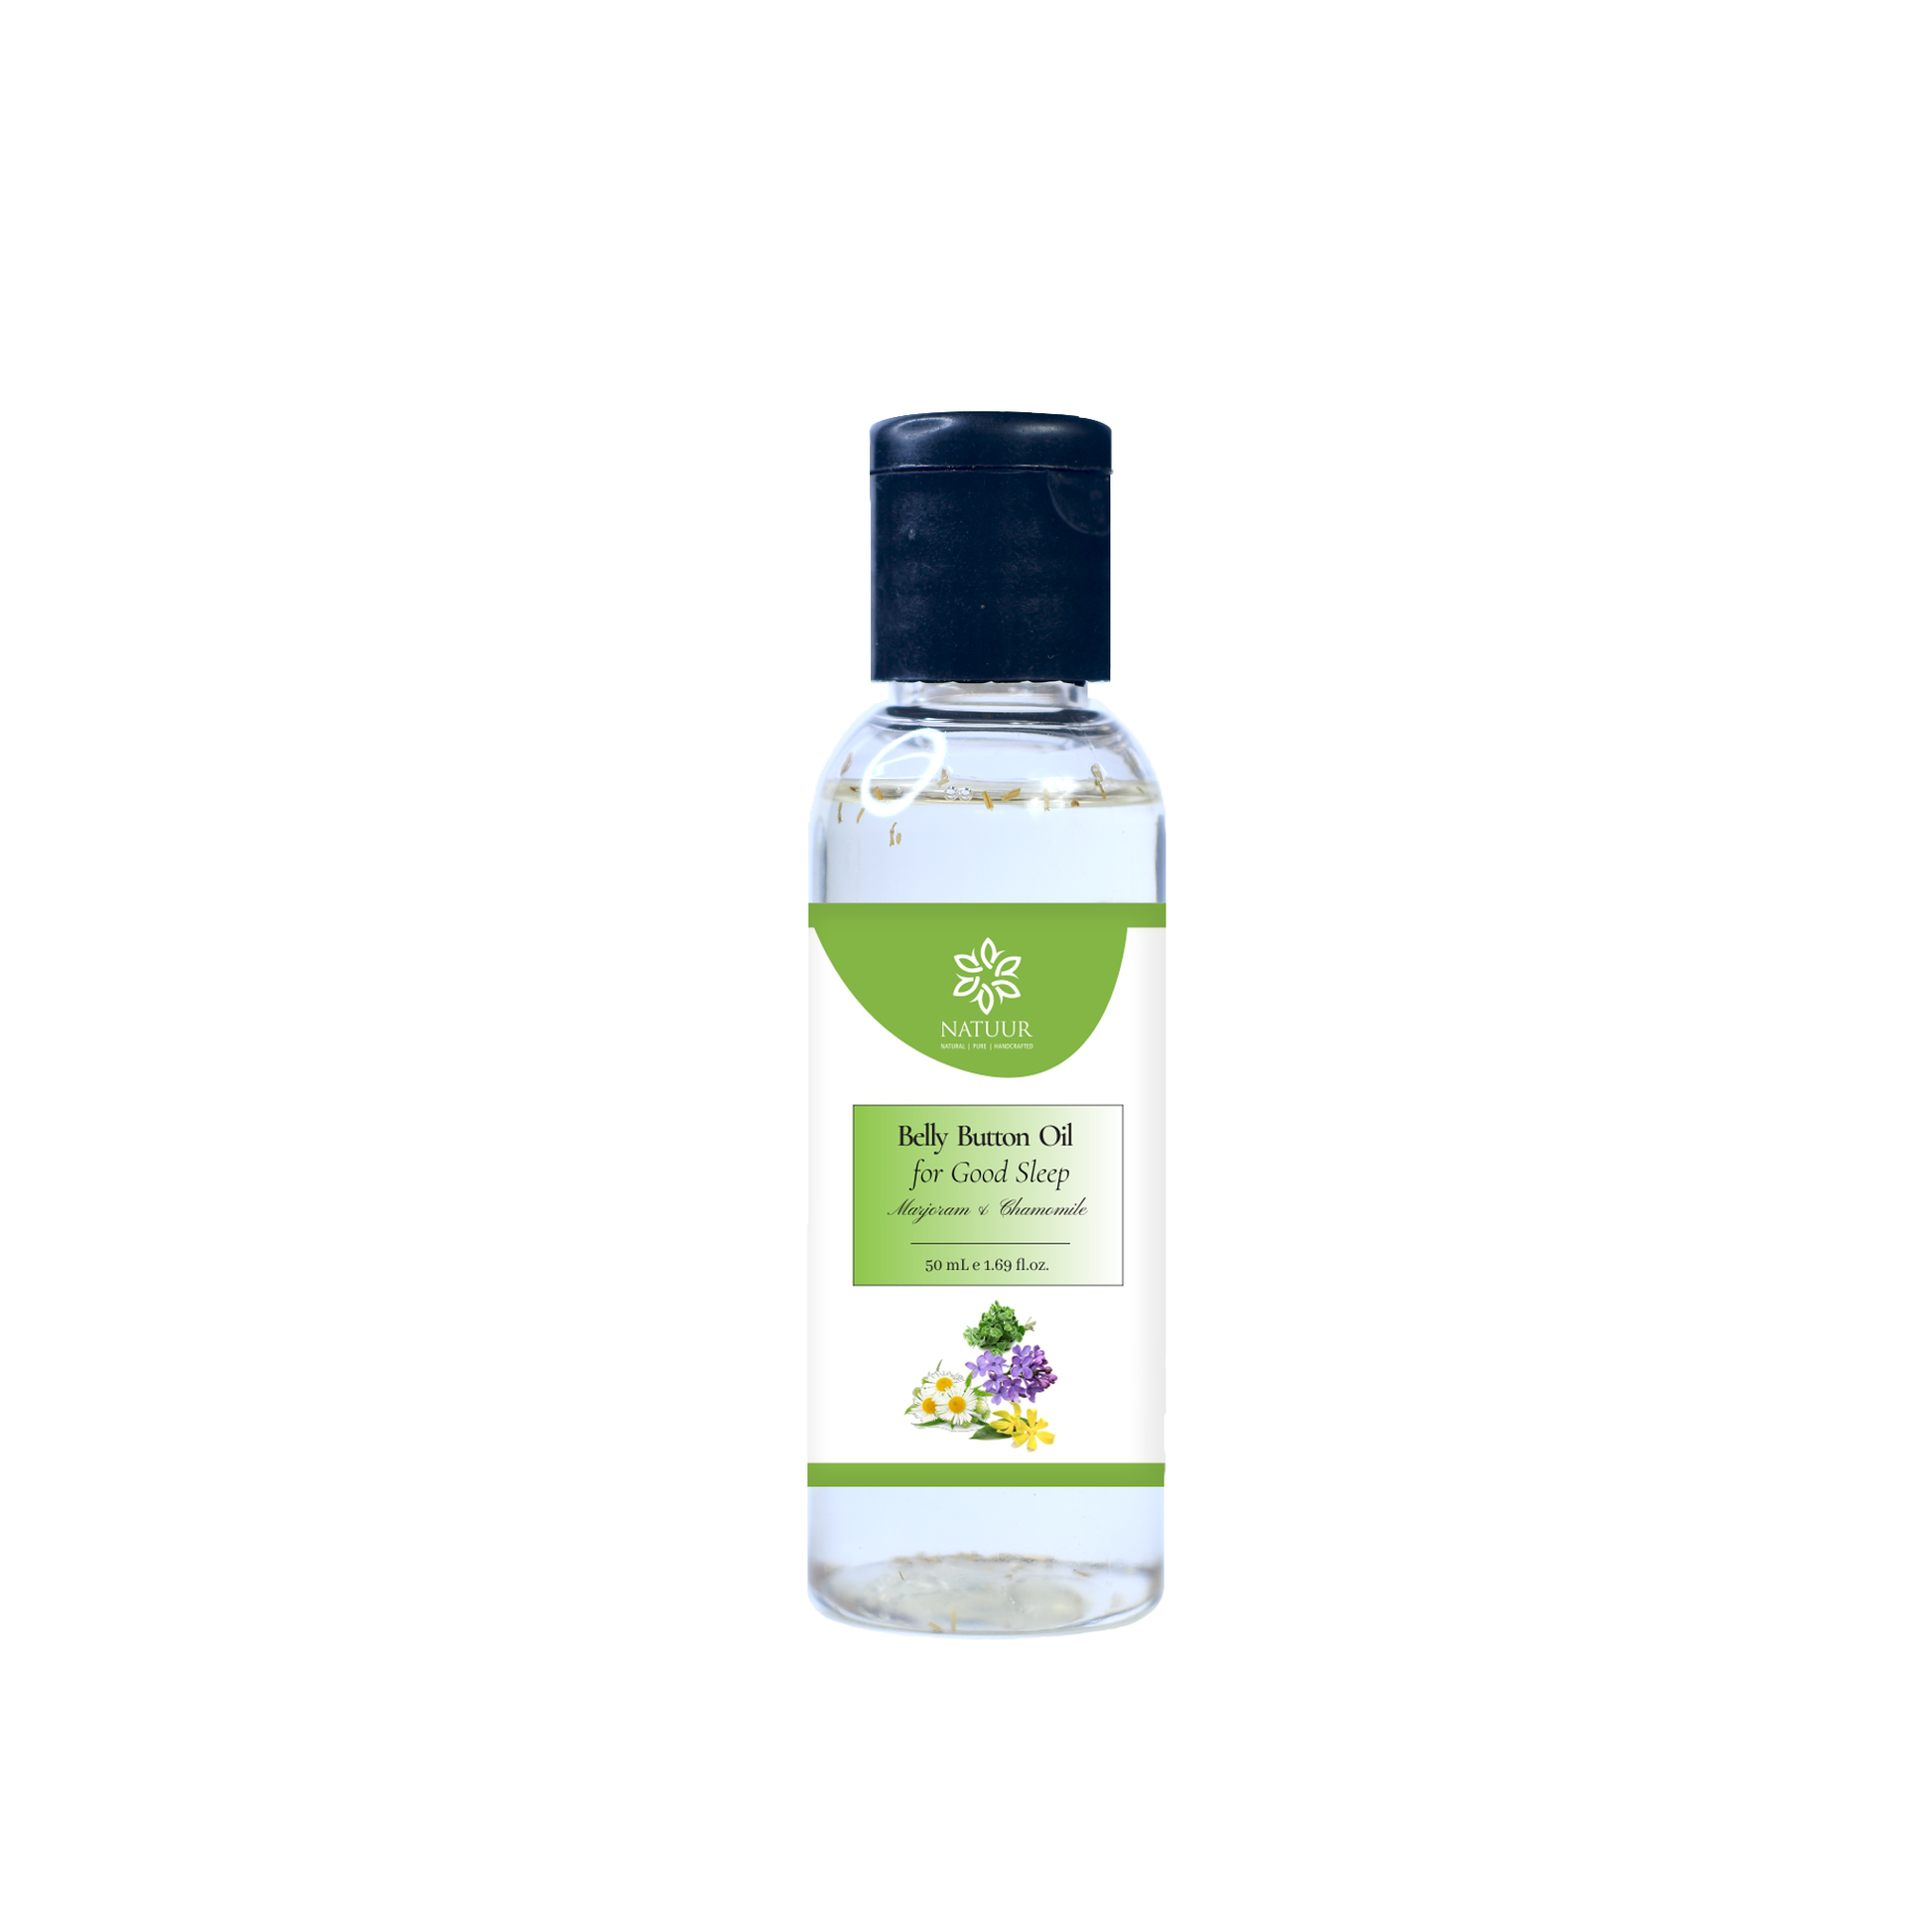 Belly Button Oil for Good Sleep (50ml) - Natuur.in